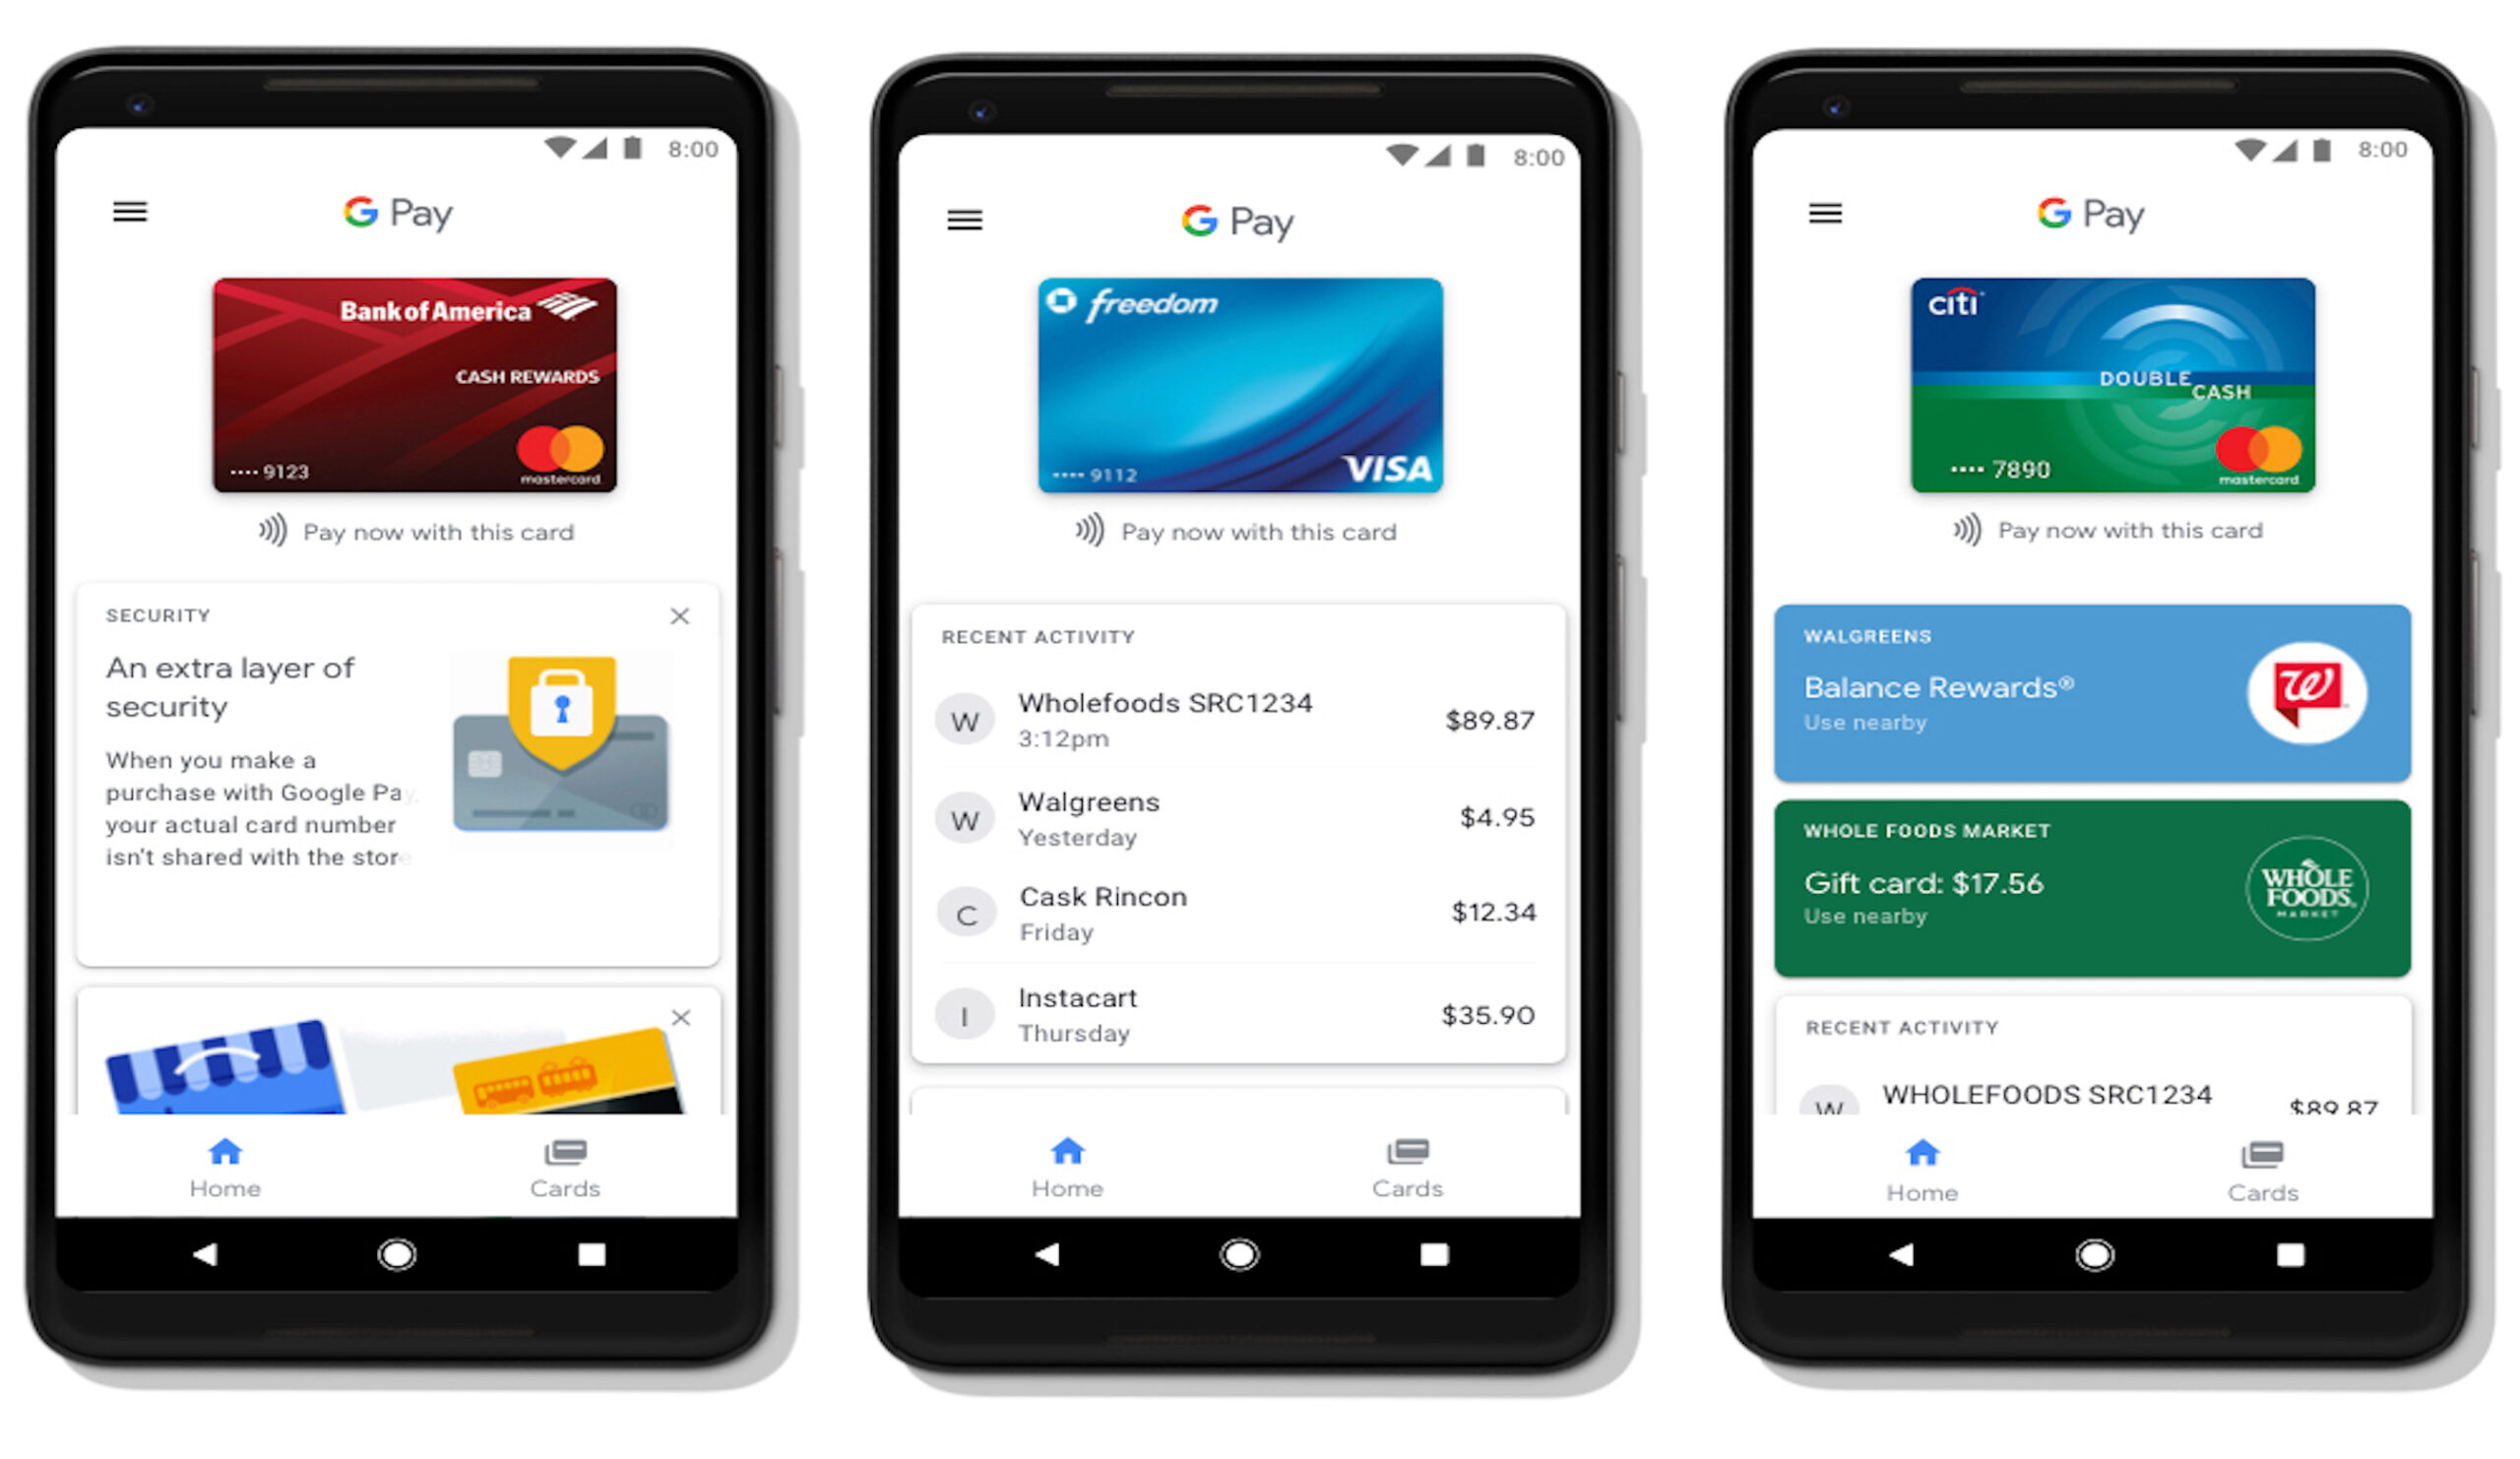 Now you can ask Google Assistant to make payment through Google Pay